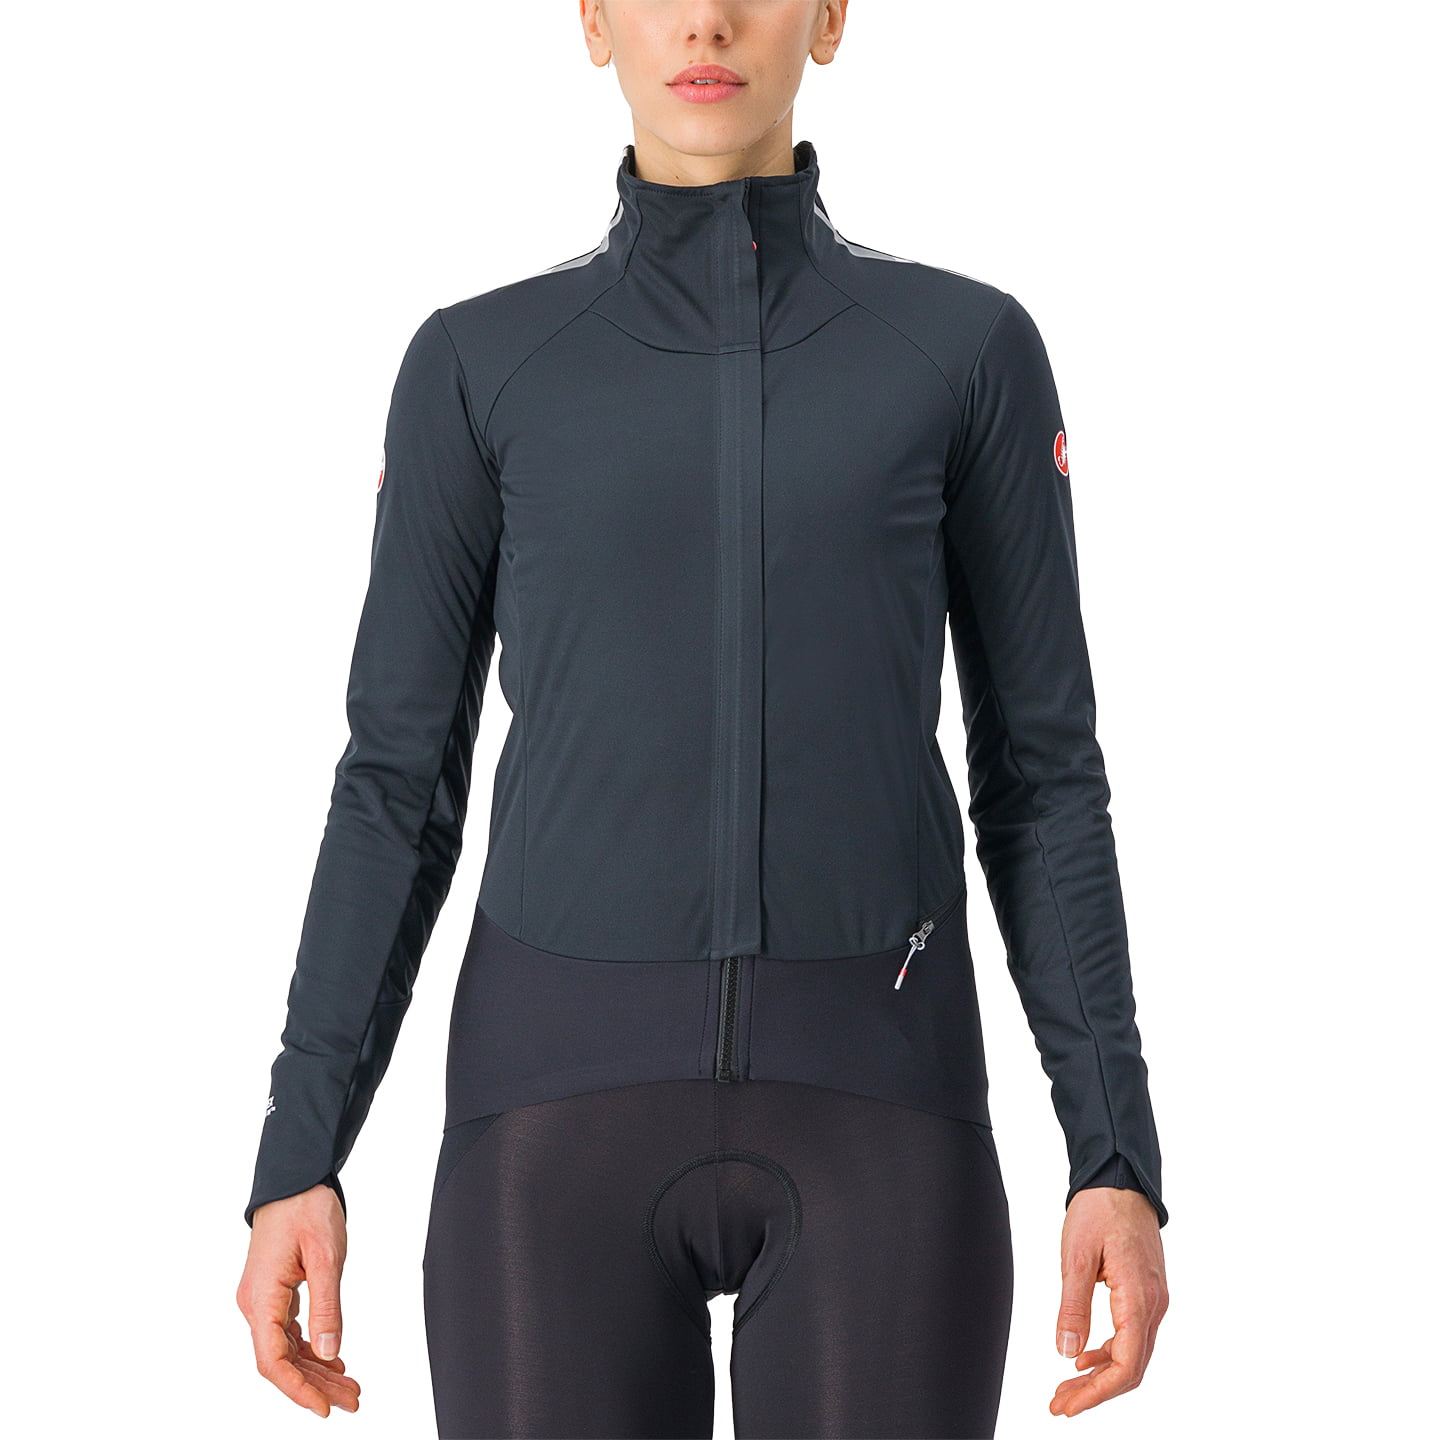 CASTELLI Women’s Winter Jacket Alpha Doppio RoS Women’s Thermal Jacket, size M, Cycle jacket, Cycling clothing